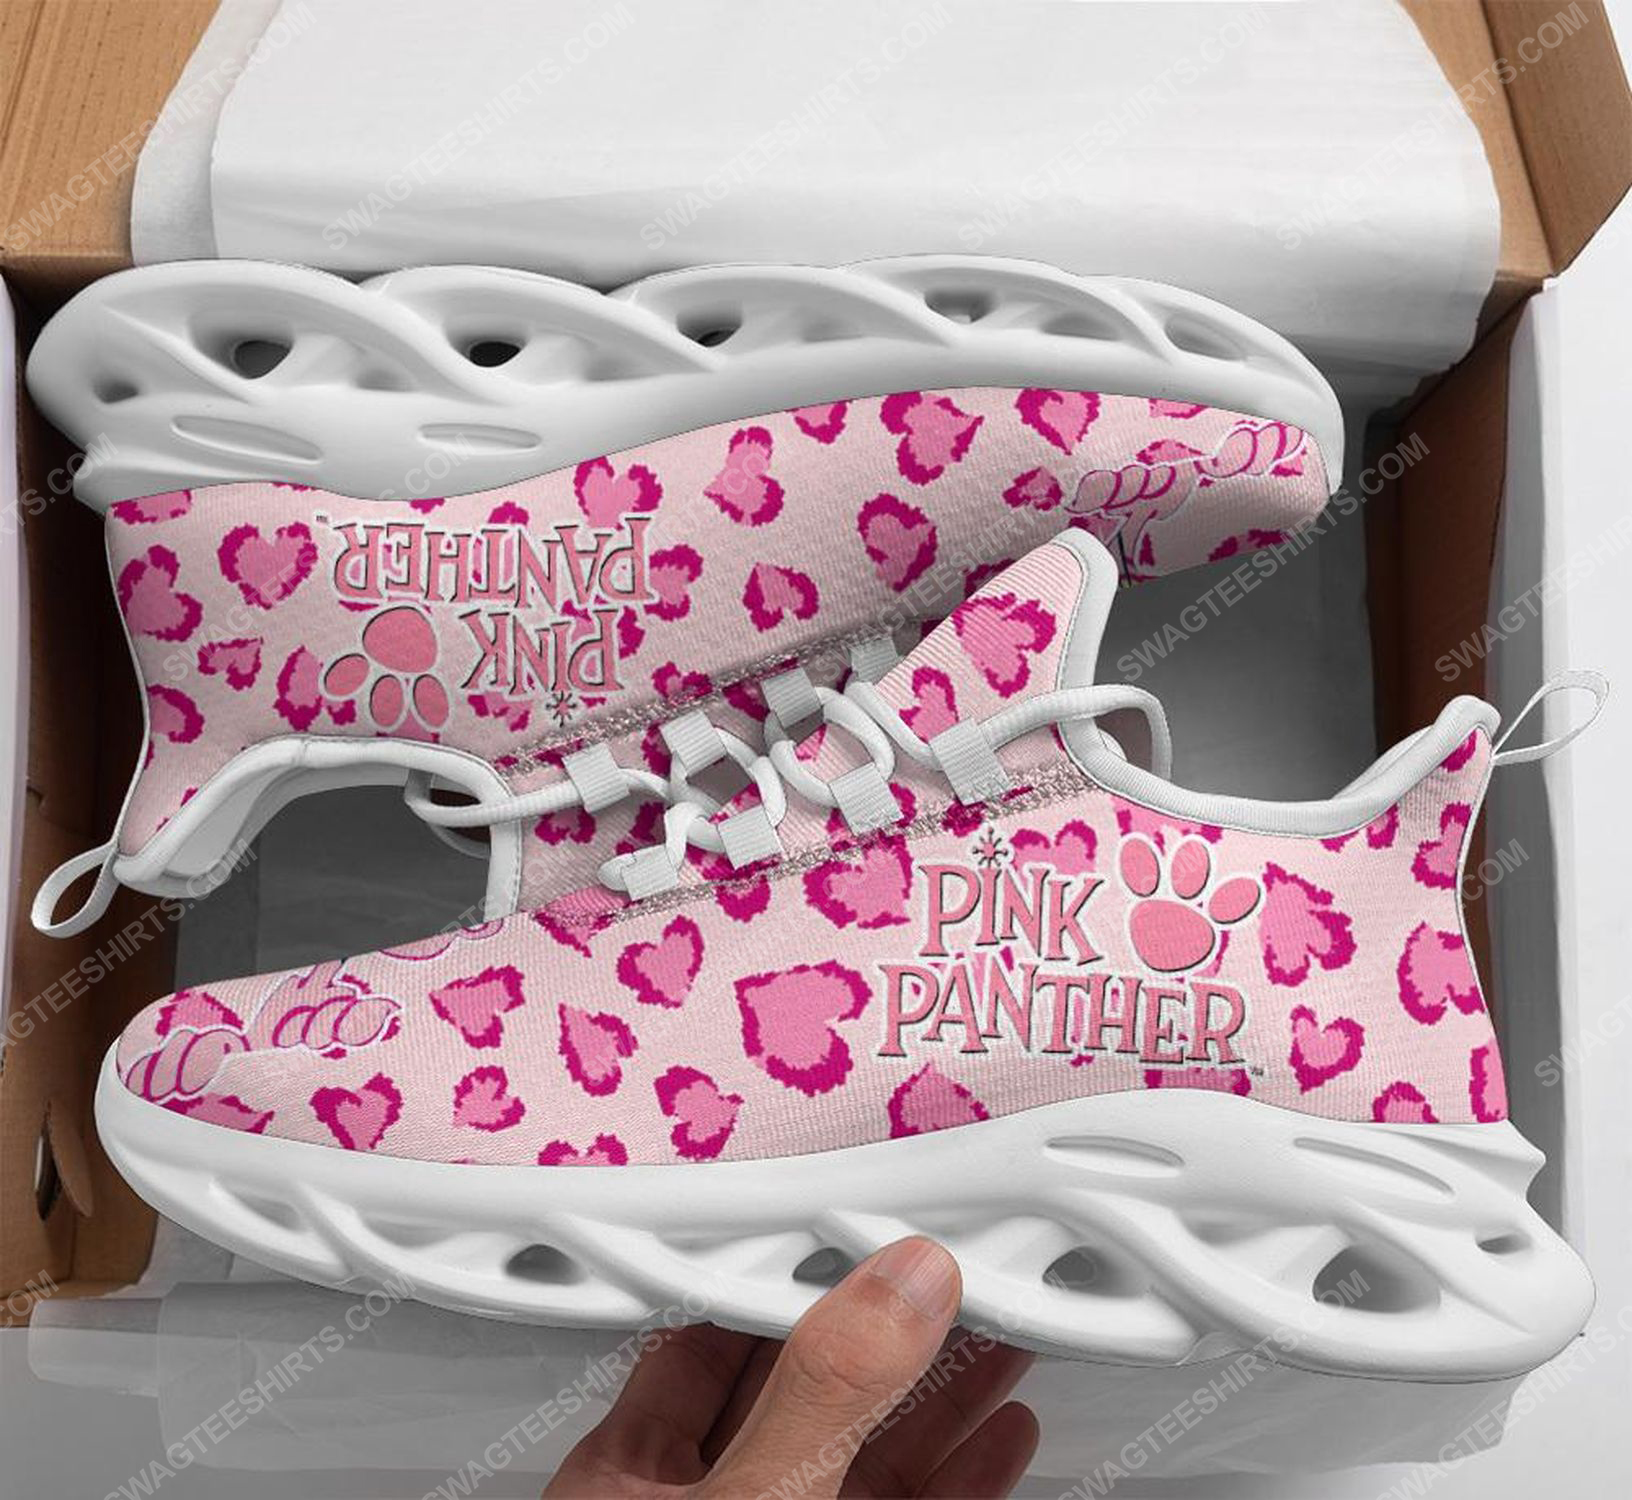 [special edition] The pink panther show max soul shoes – Maria